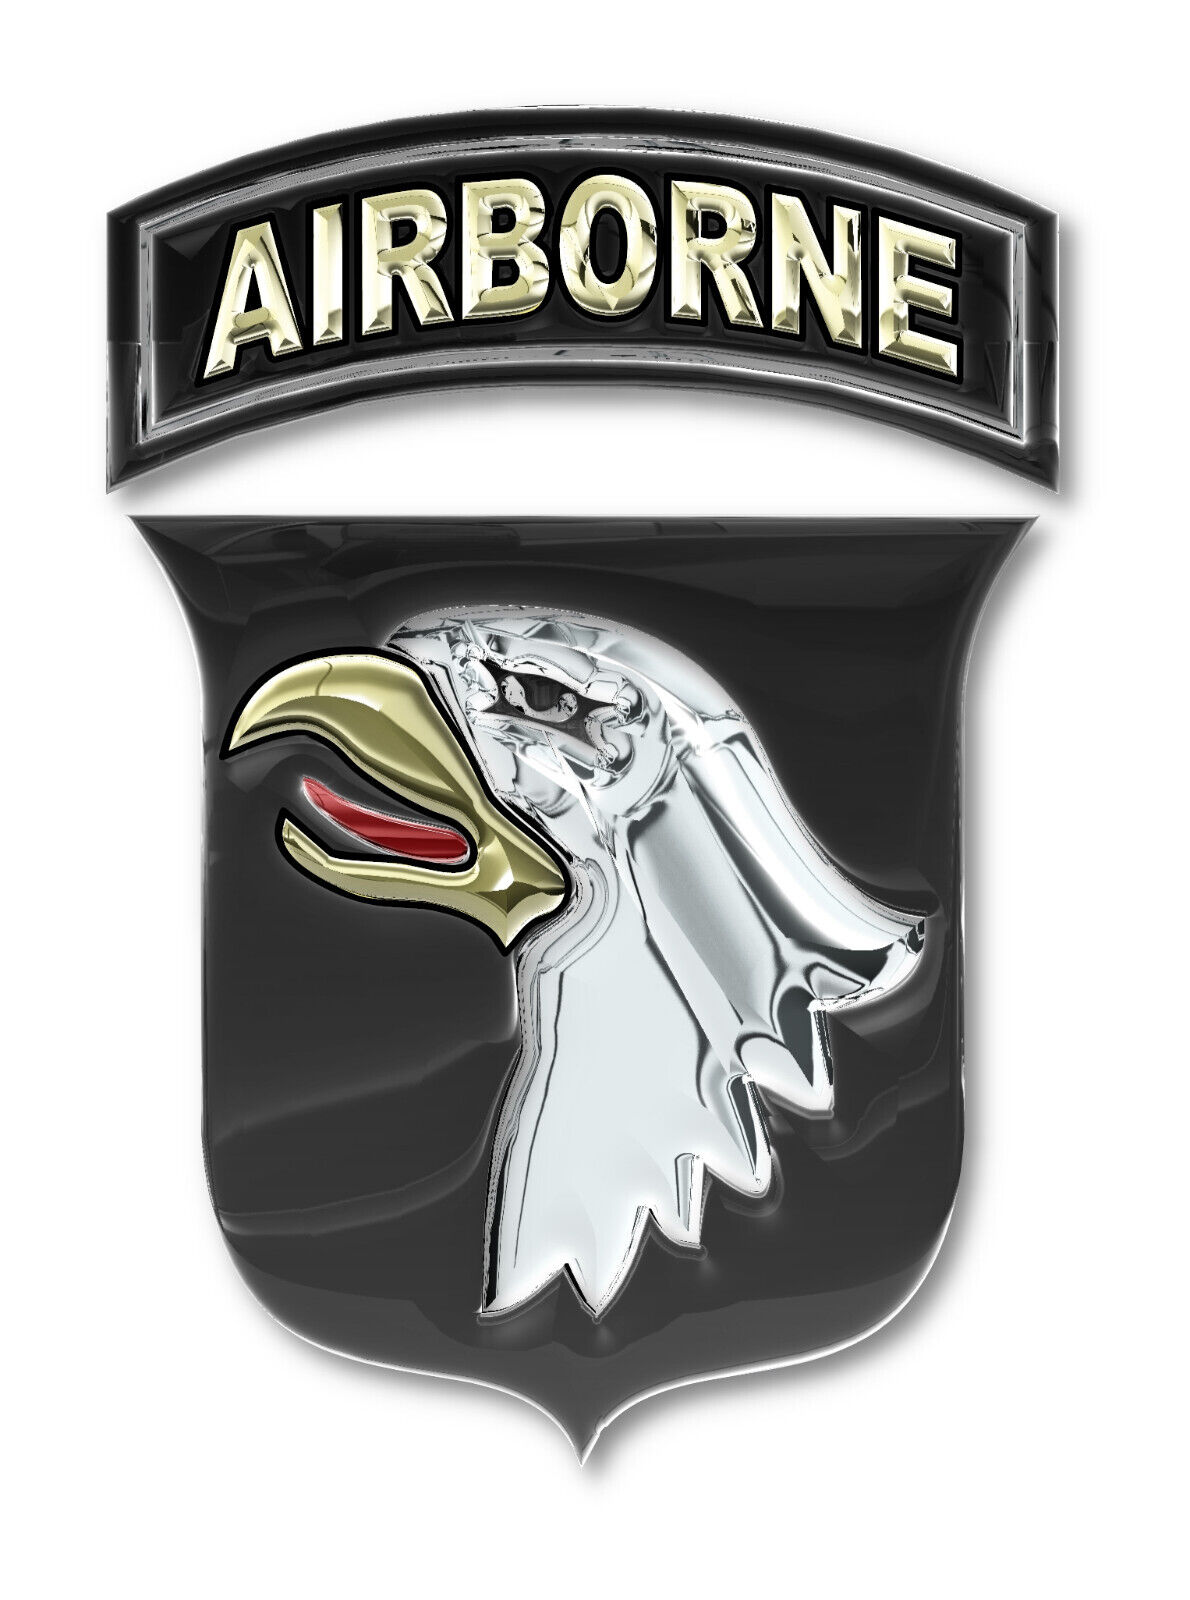 101st Airborne Division Sticker Decal (Select your Size)